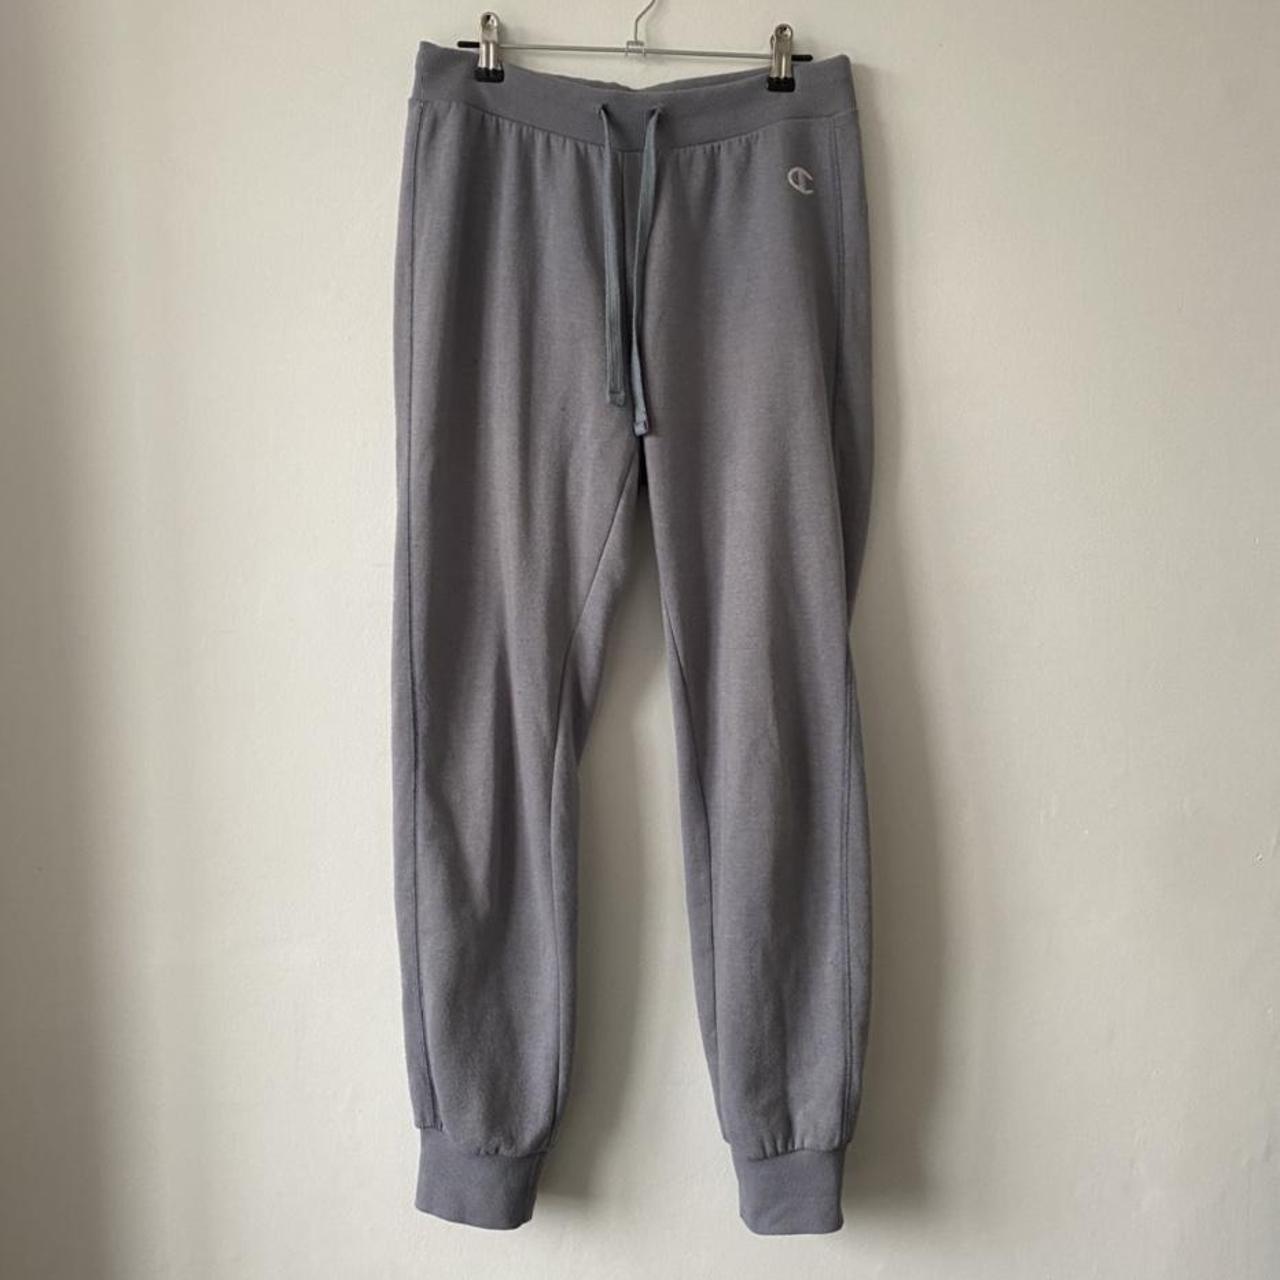 Vintage grey Champion trackies. Have a few signs of... - Depop